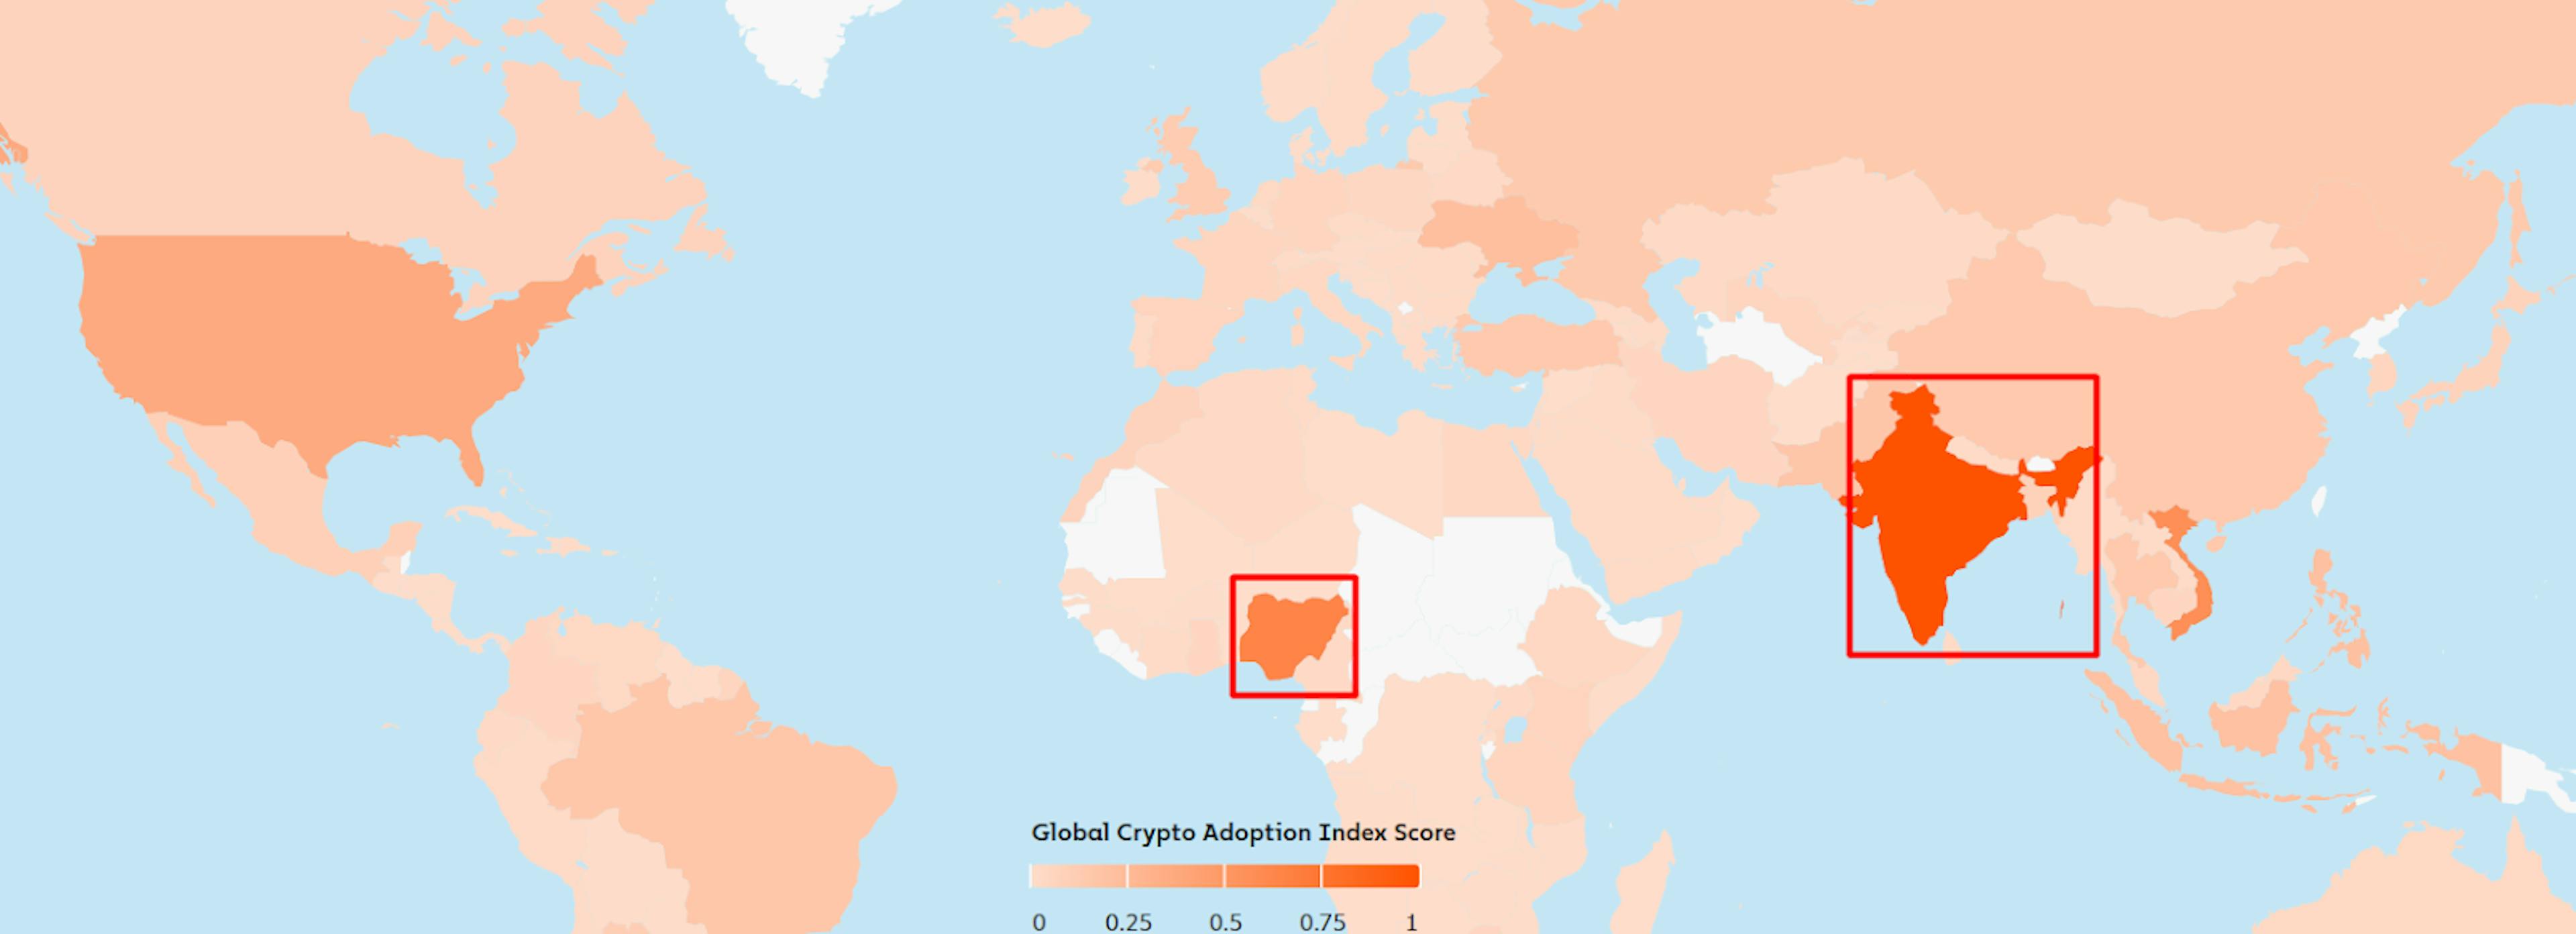 Quelle: https://www.chainalysis.com/blog/2023-global-crypto-adoption-index/#top20